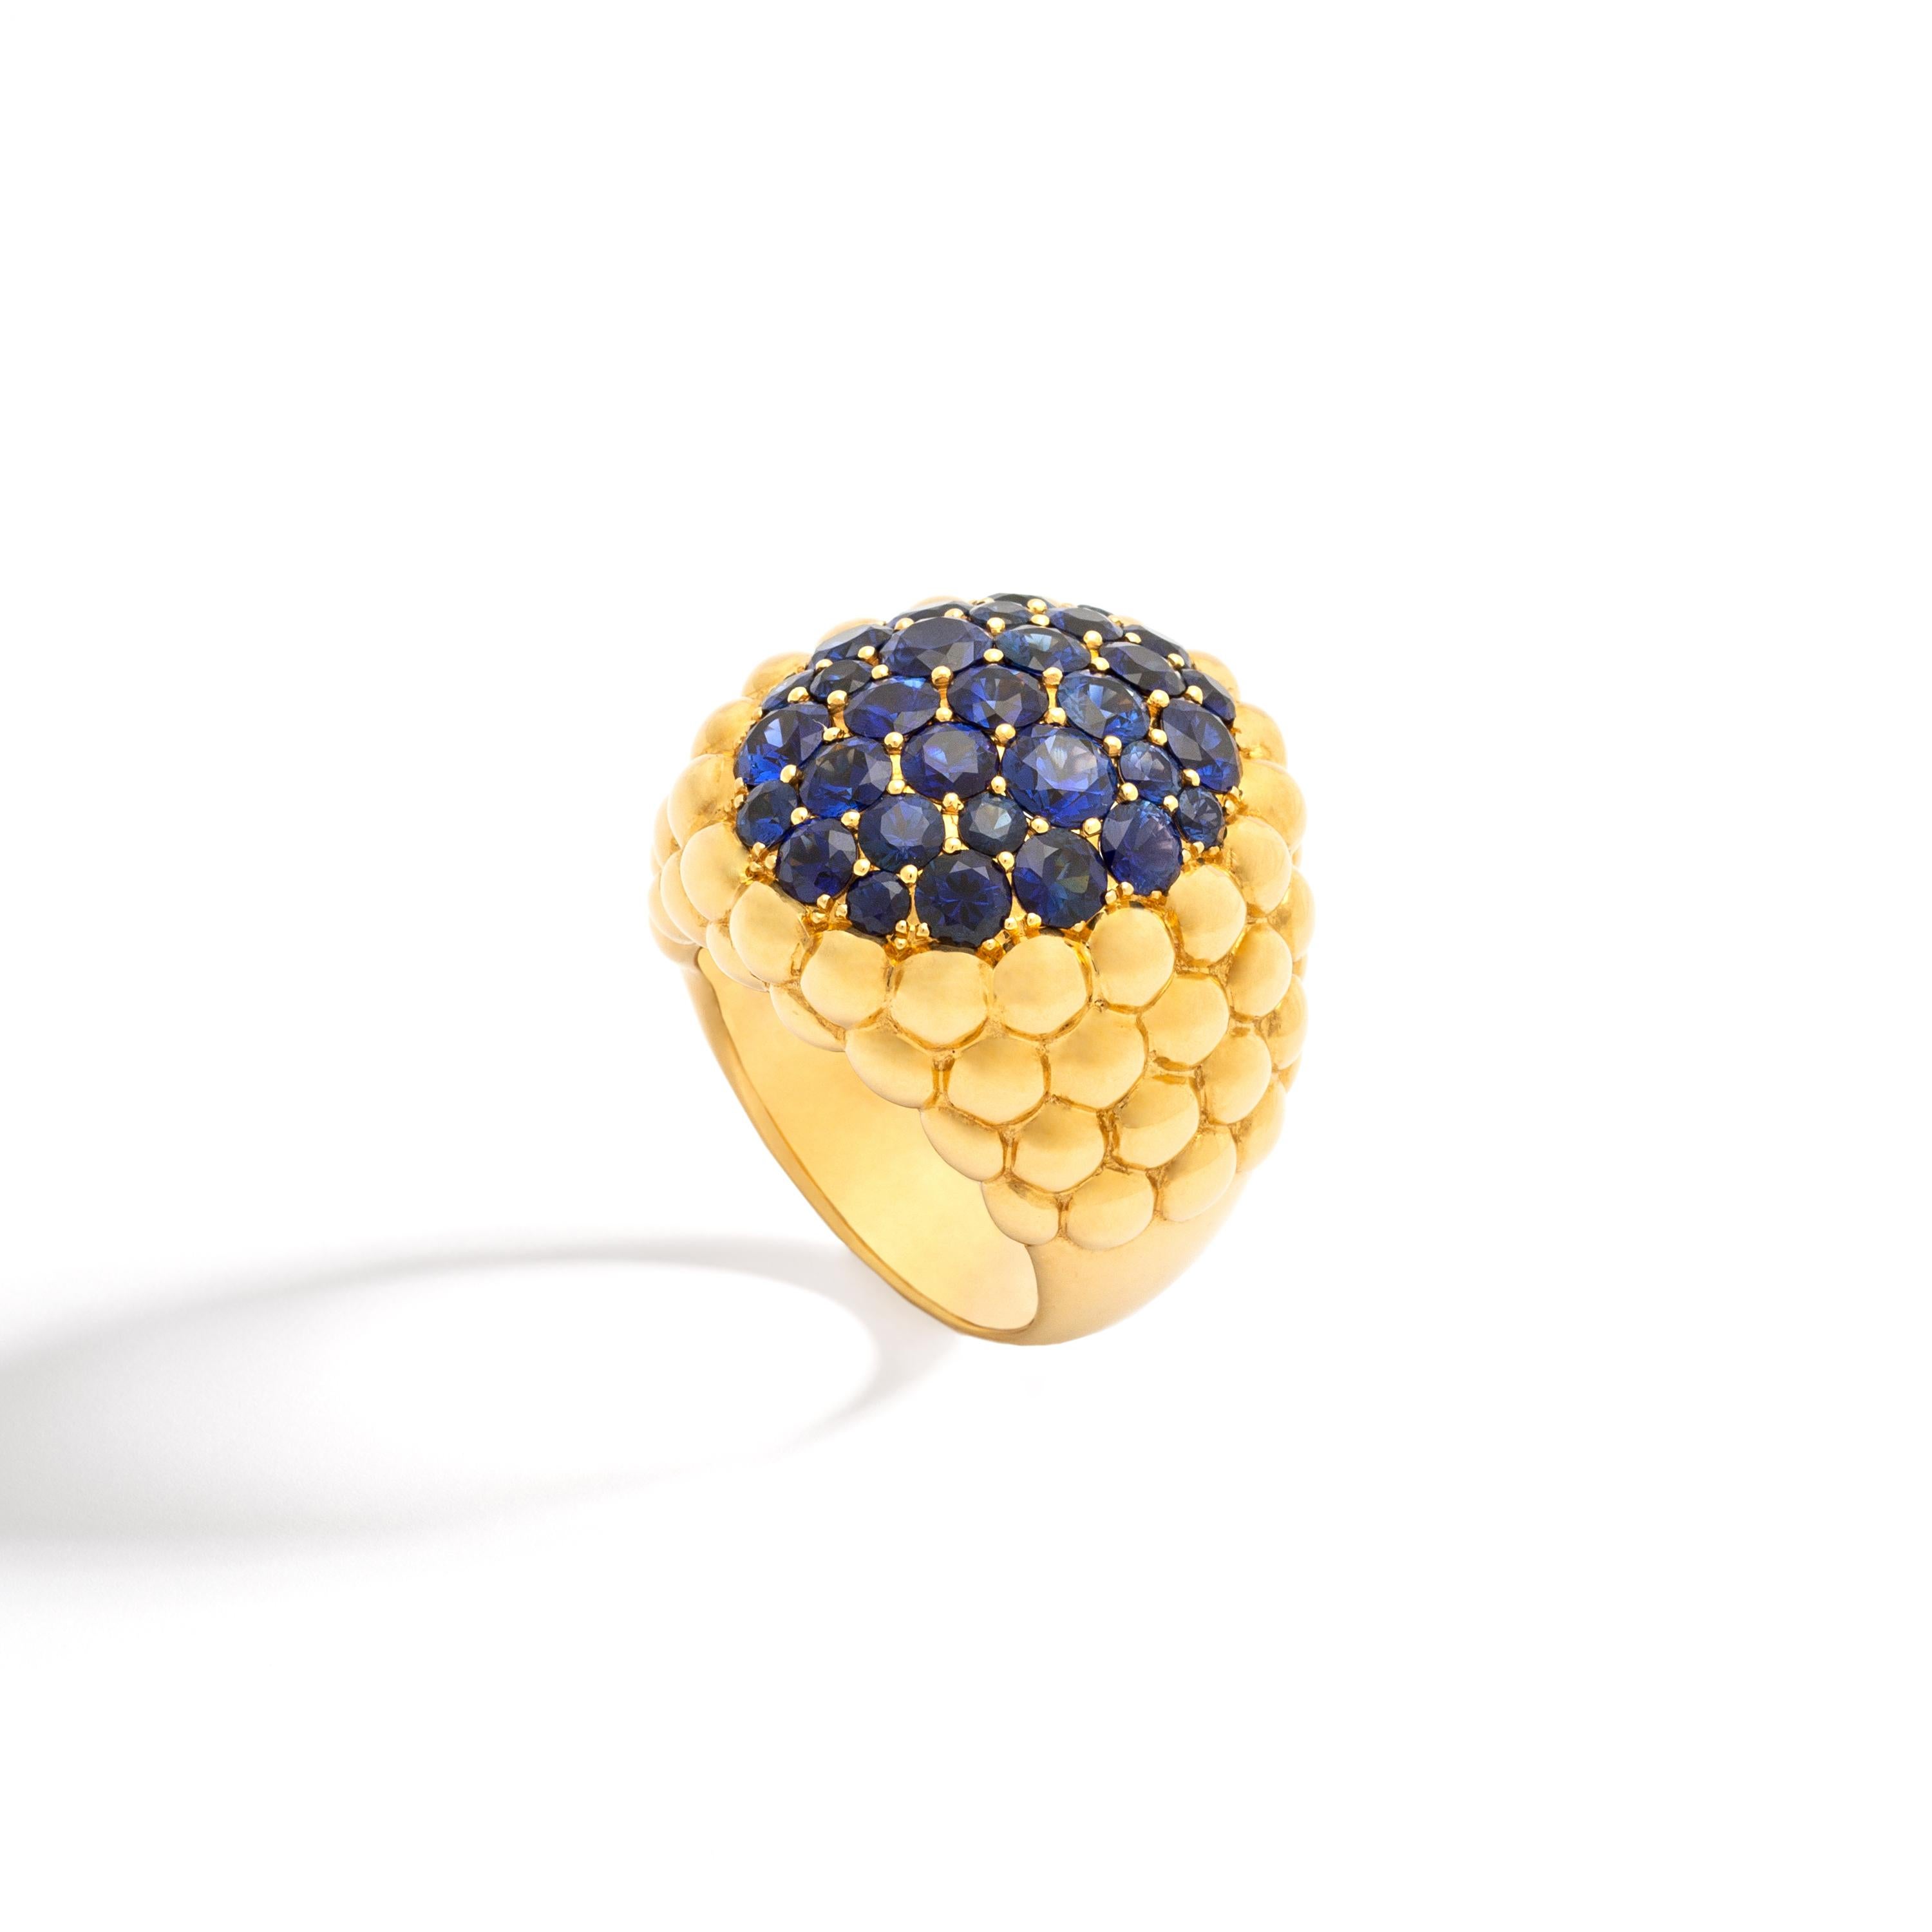 31 Sapphires weight 7.80 carats total on yellow gold 18k Ring.
Contemporary.